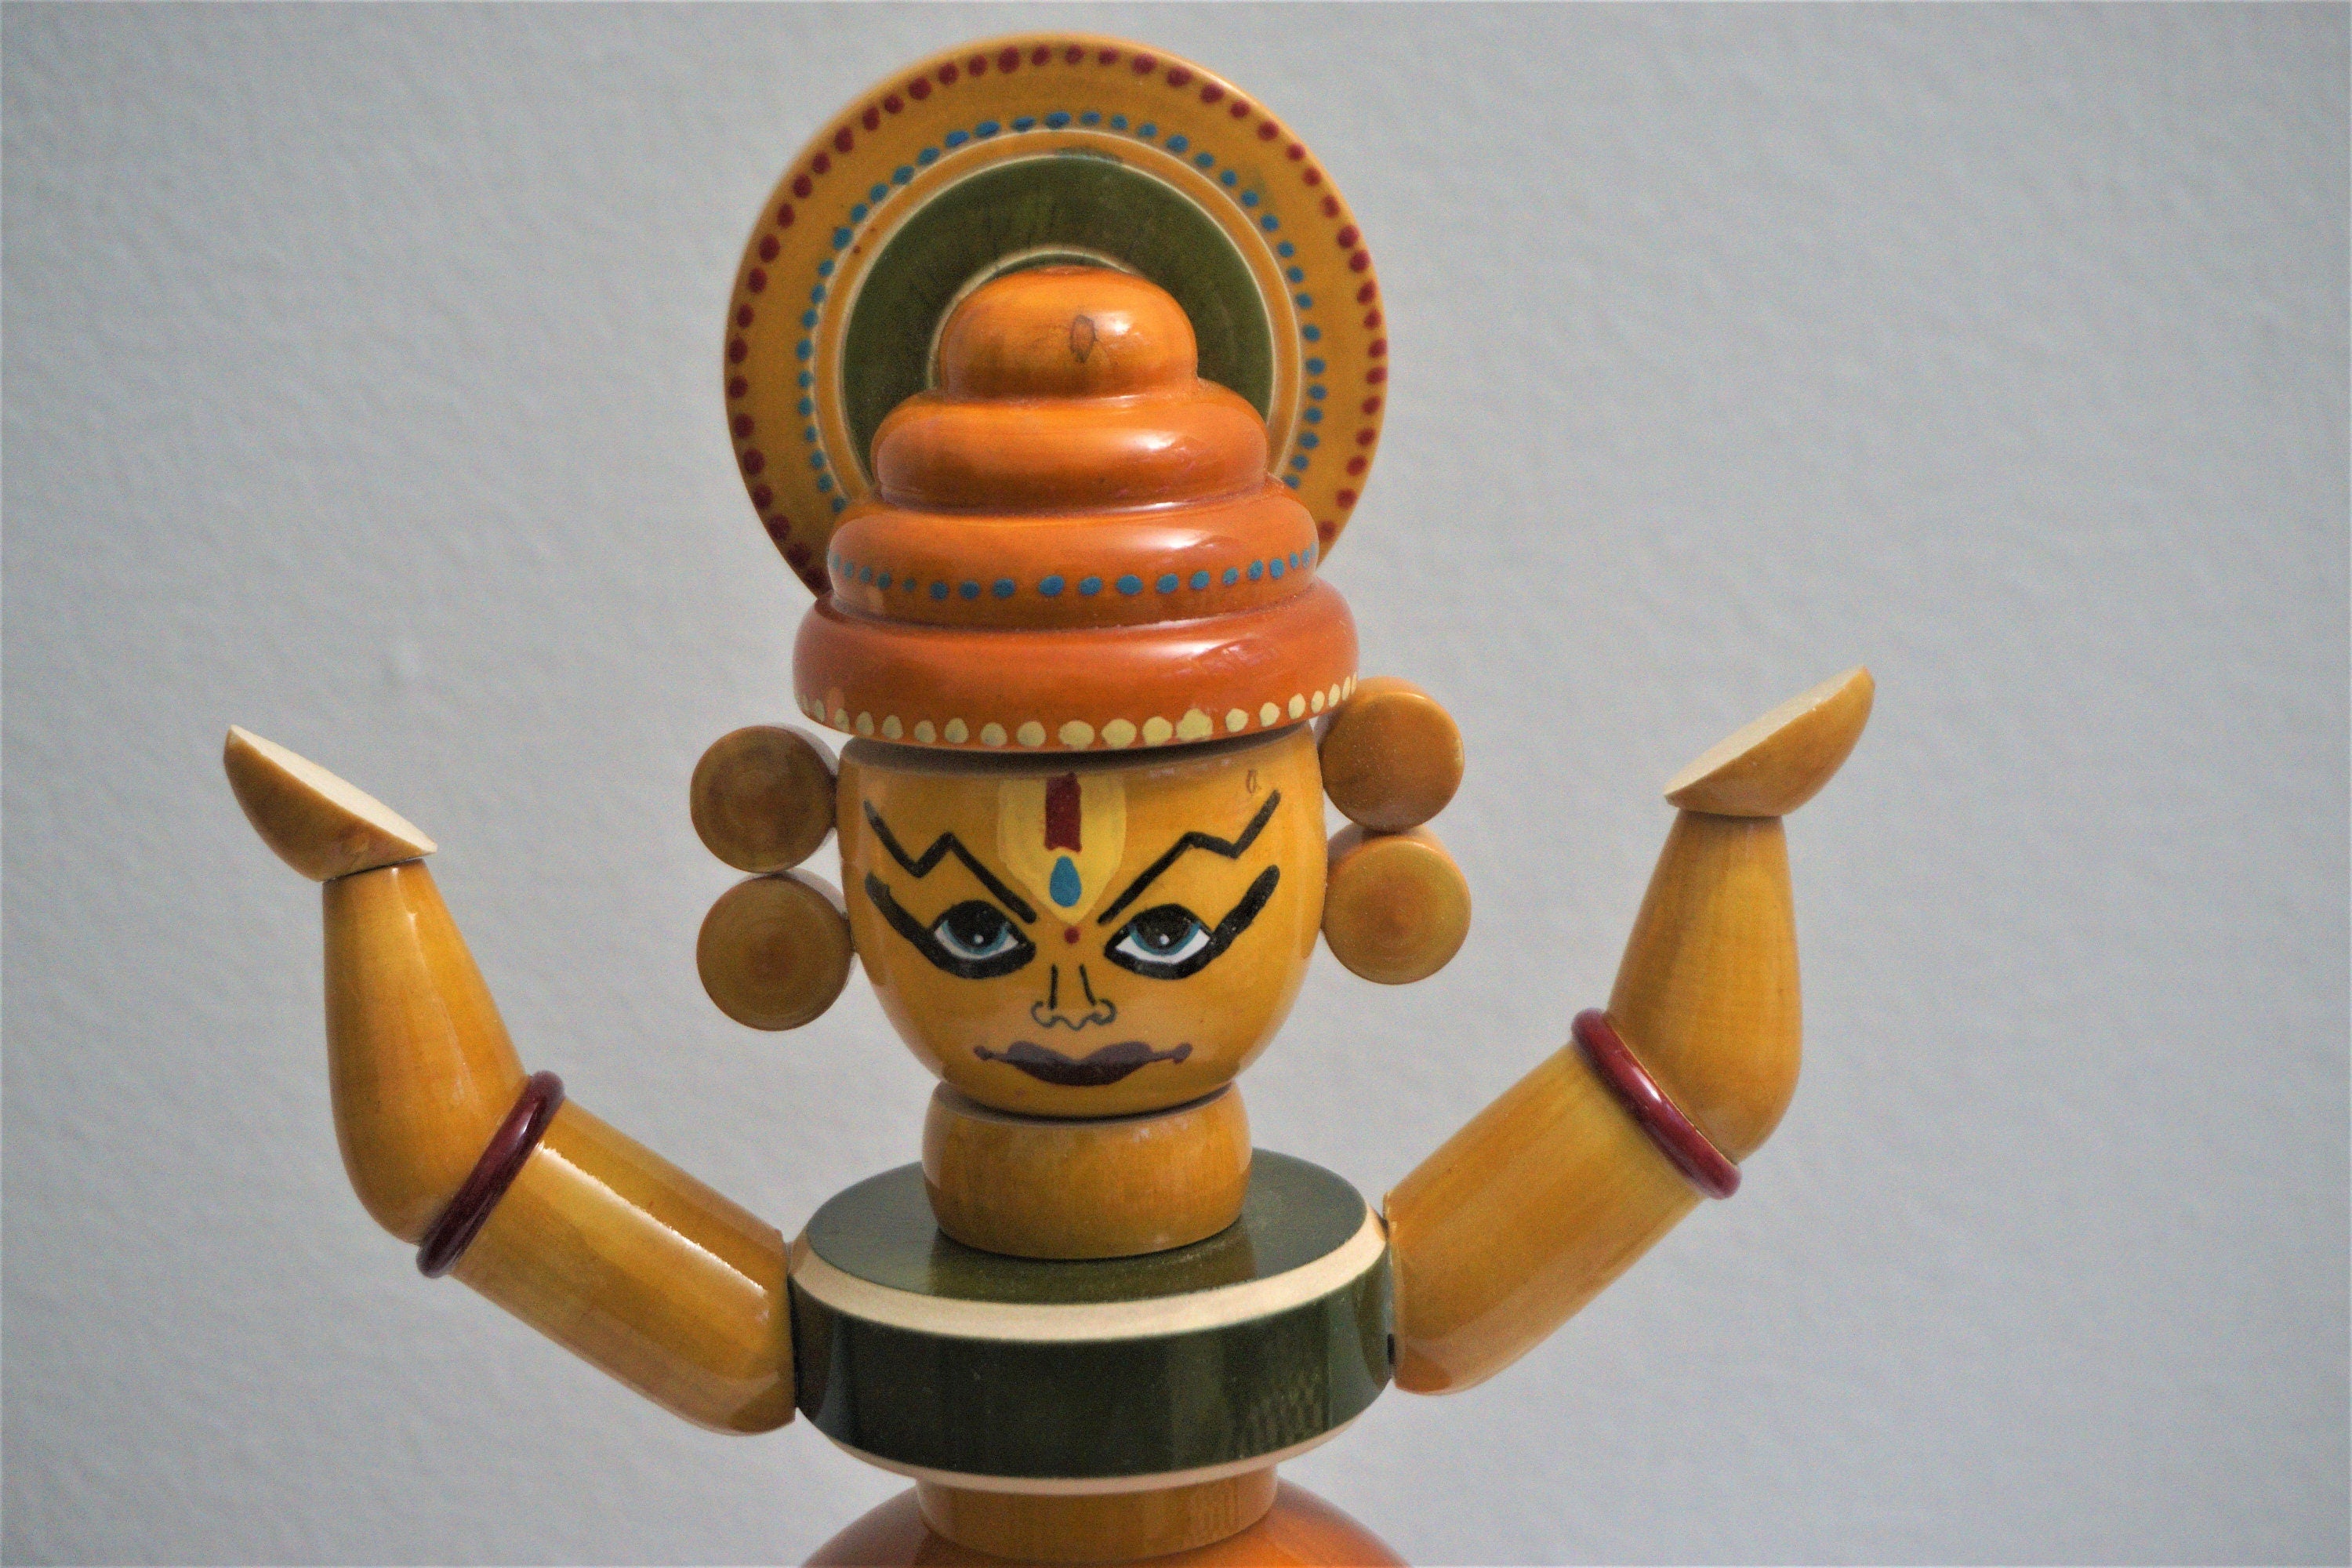 Handmade Idol showing India's Kathakali Dance form with all parts moving